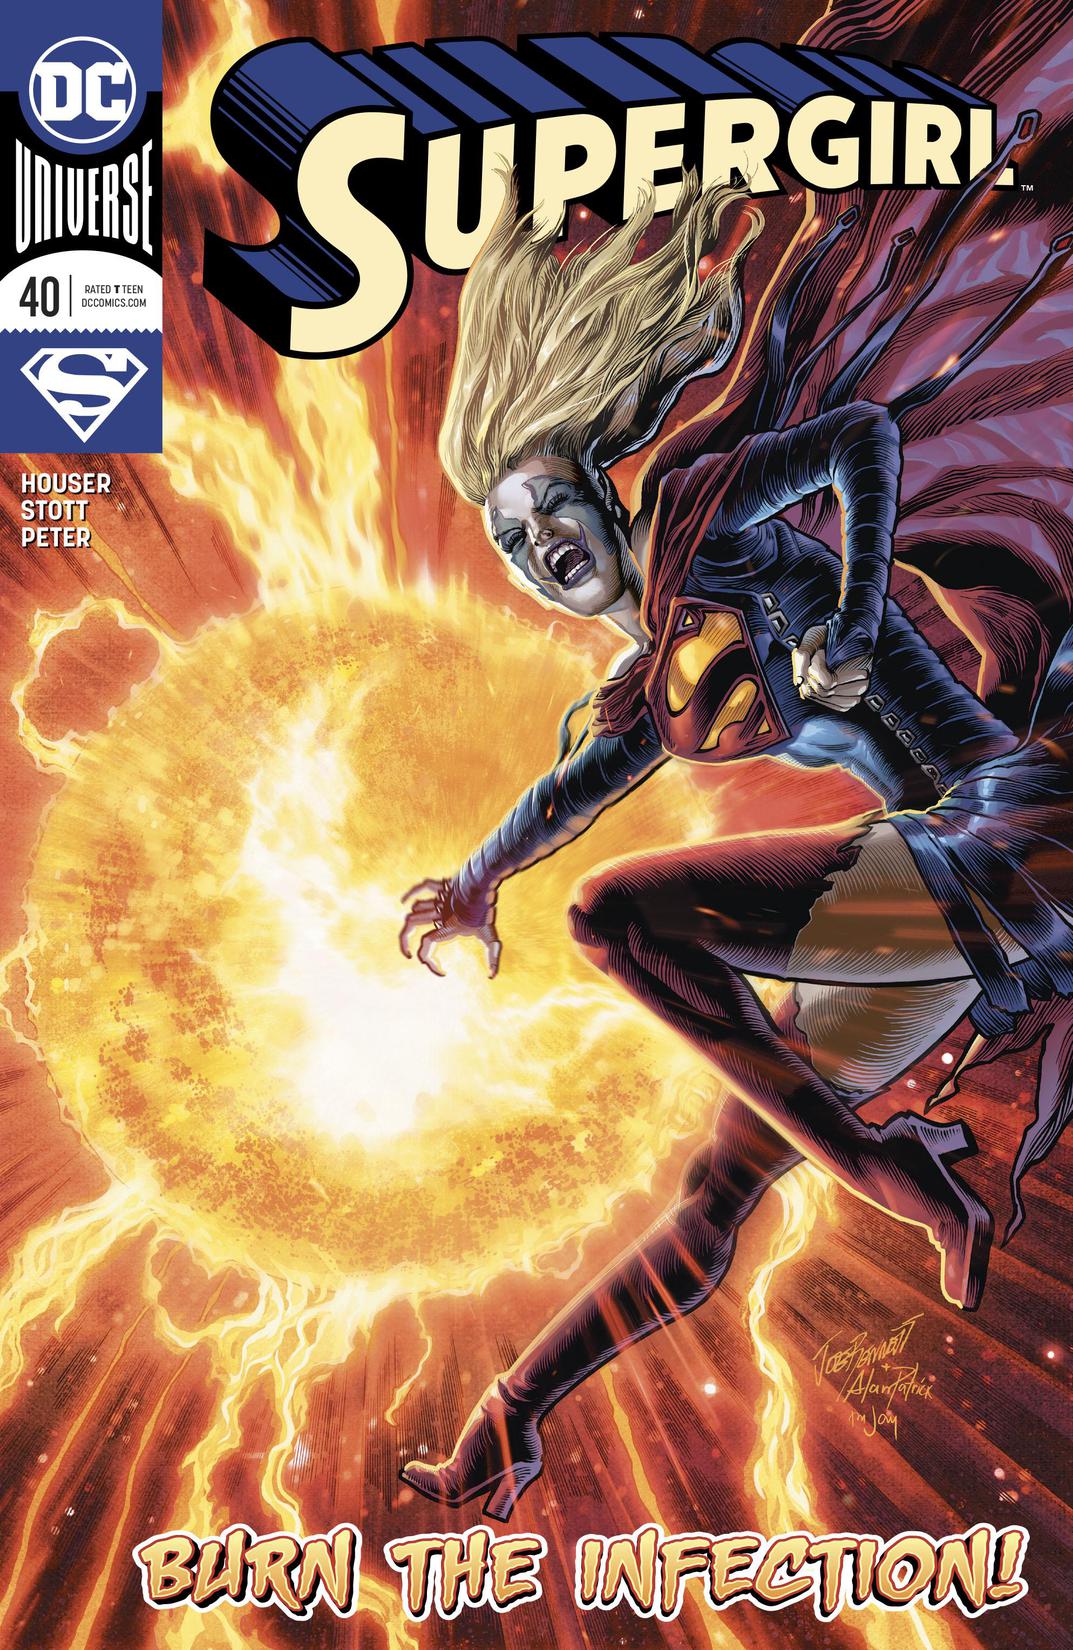 Supergirl (2016-2020) #40 preview images